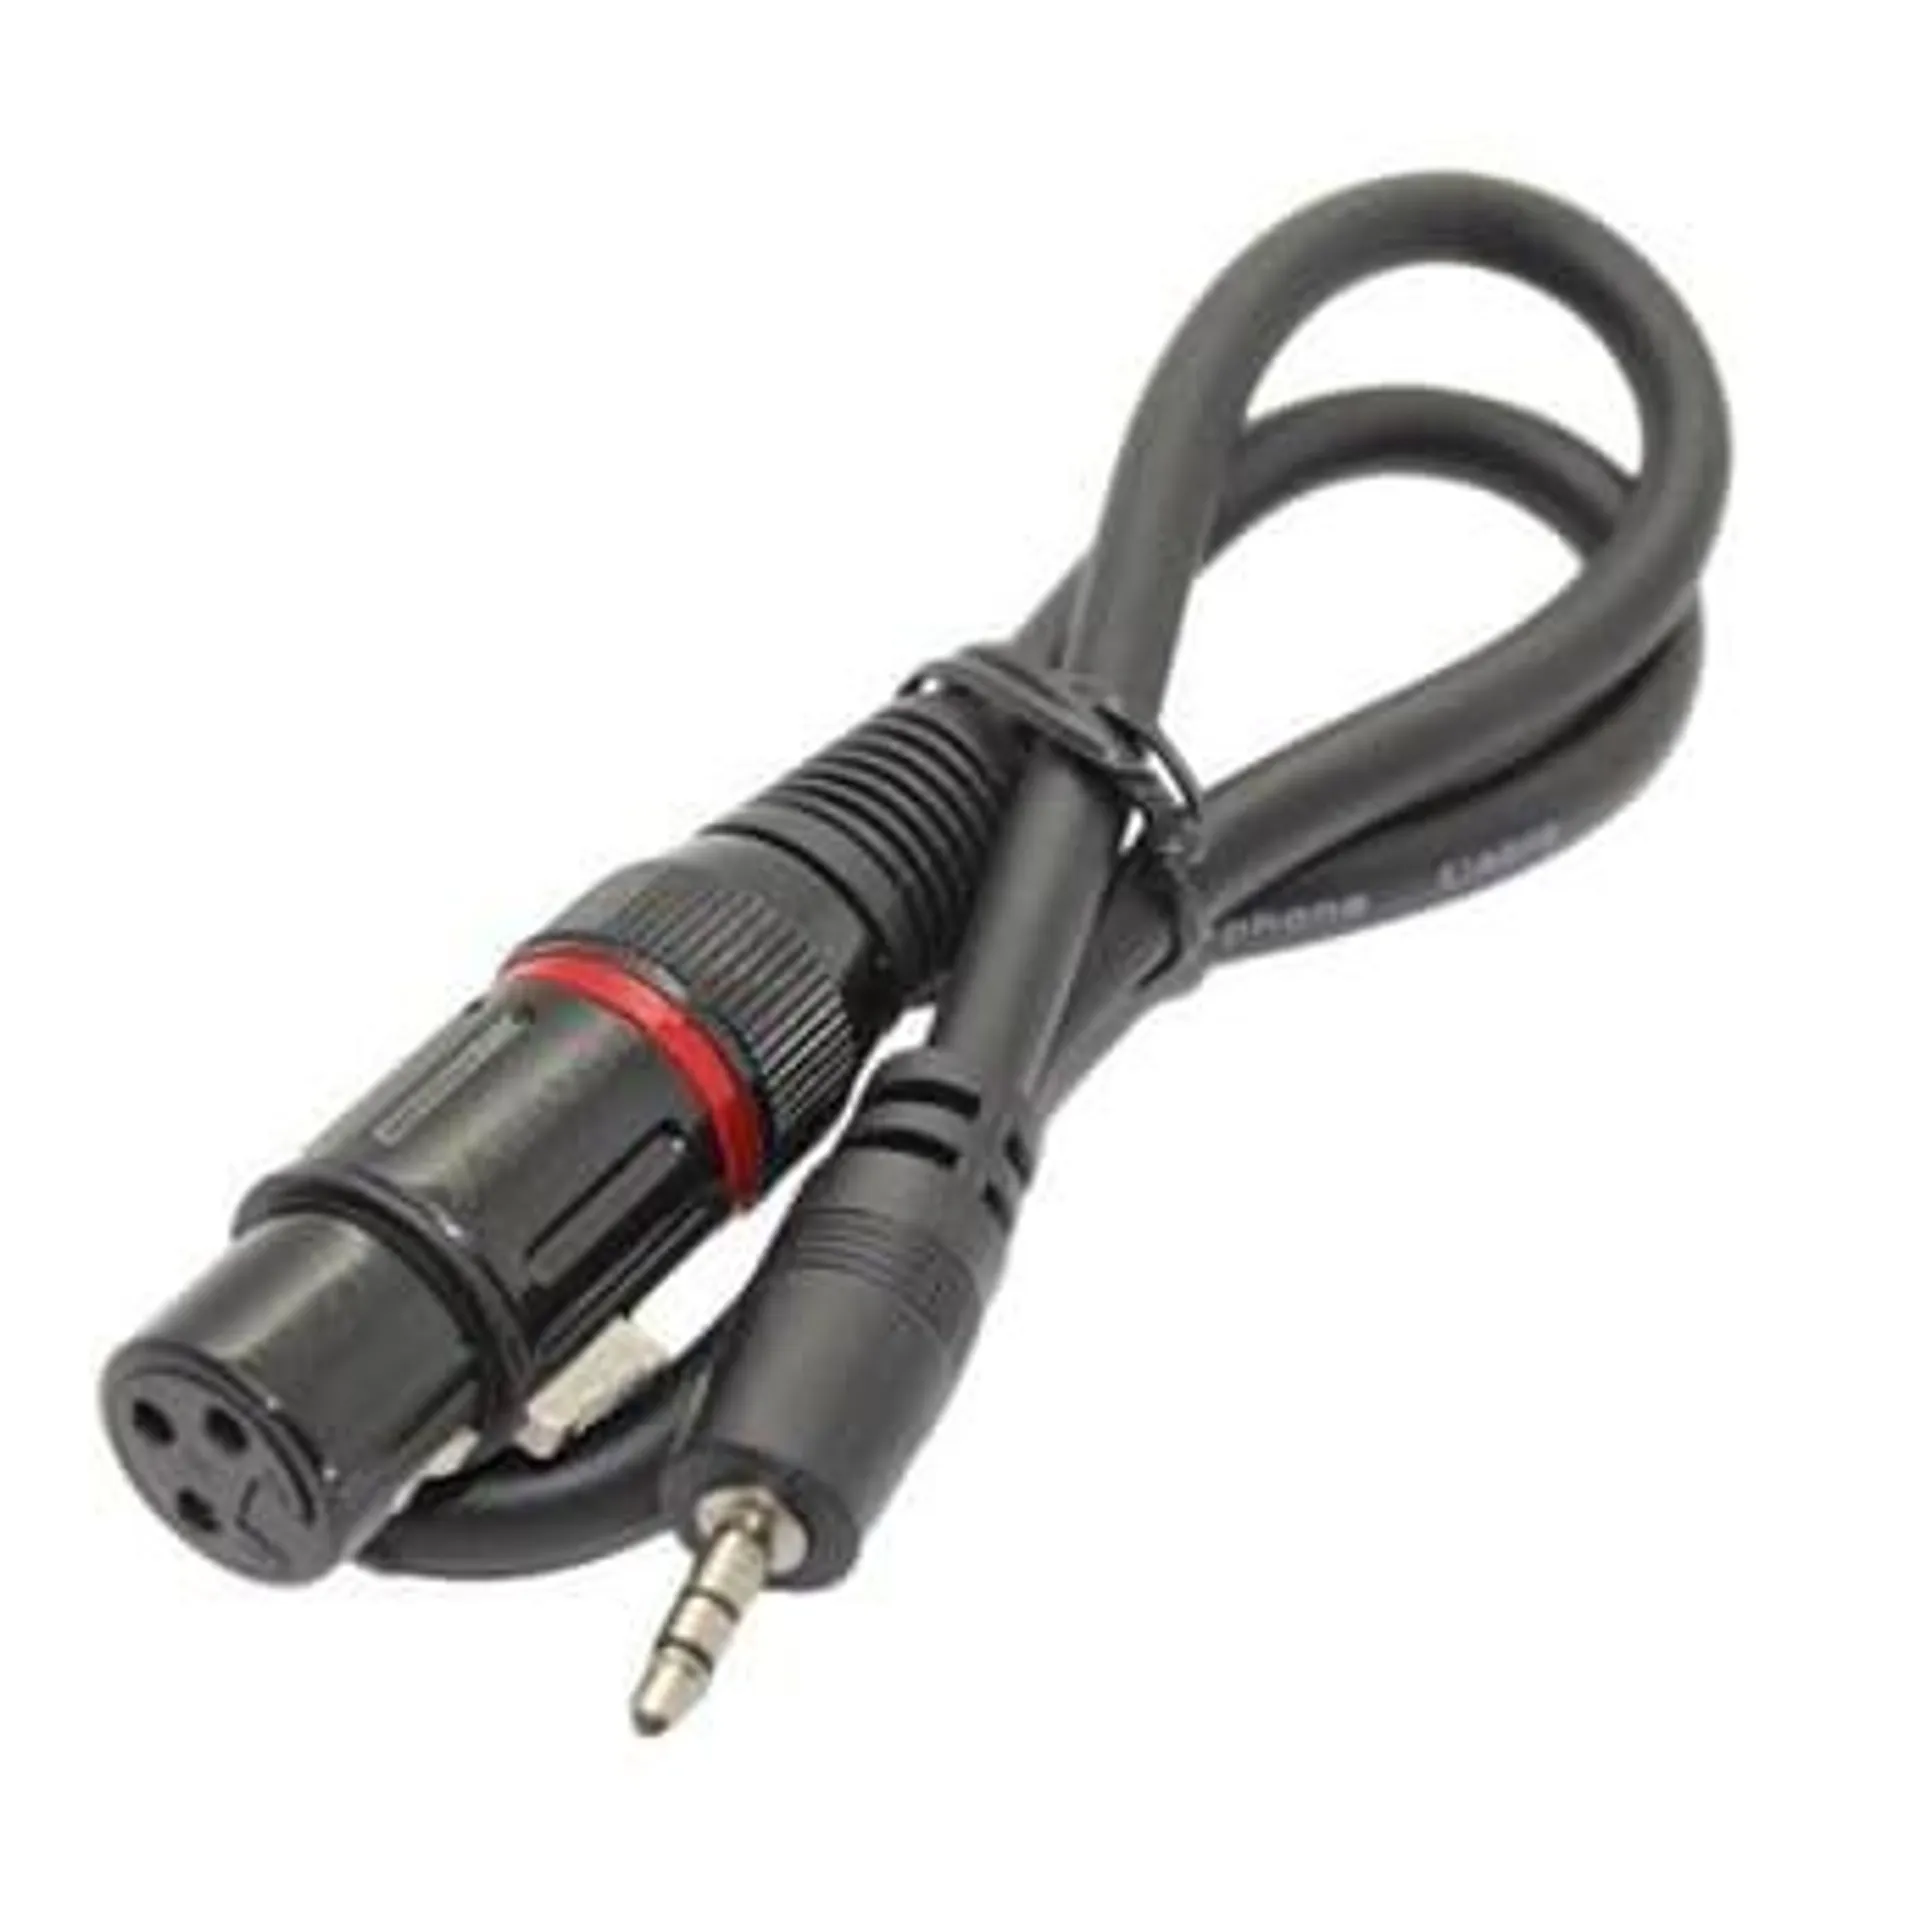 Cyberdyne 3.5mm Stereo Male to XLR (Cannon) Female Cable (50cm)